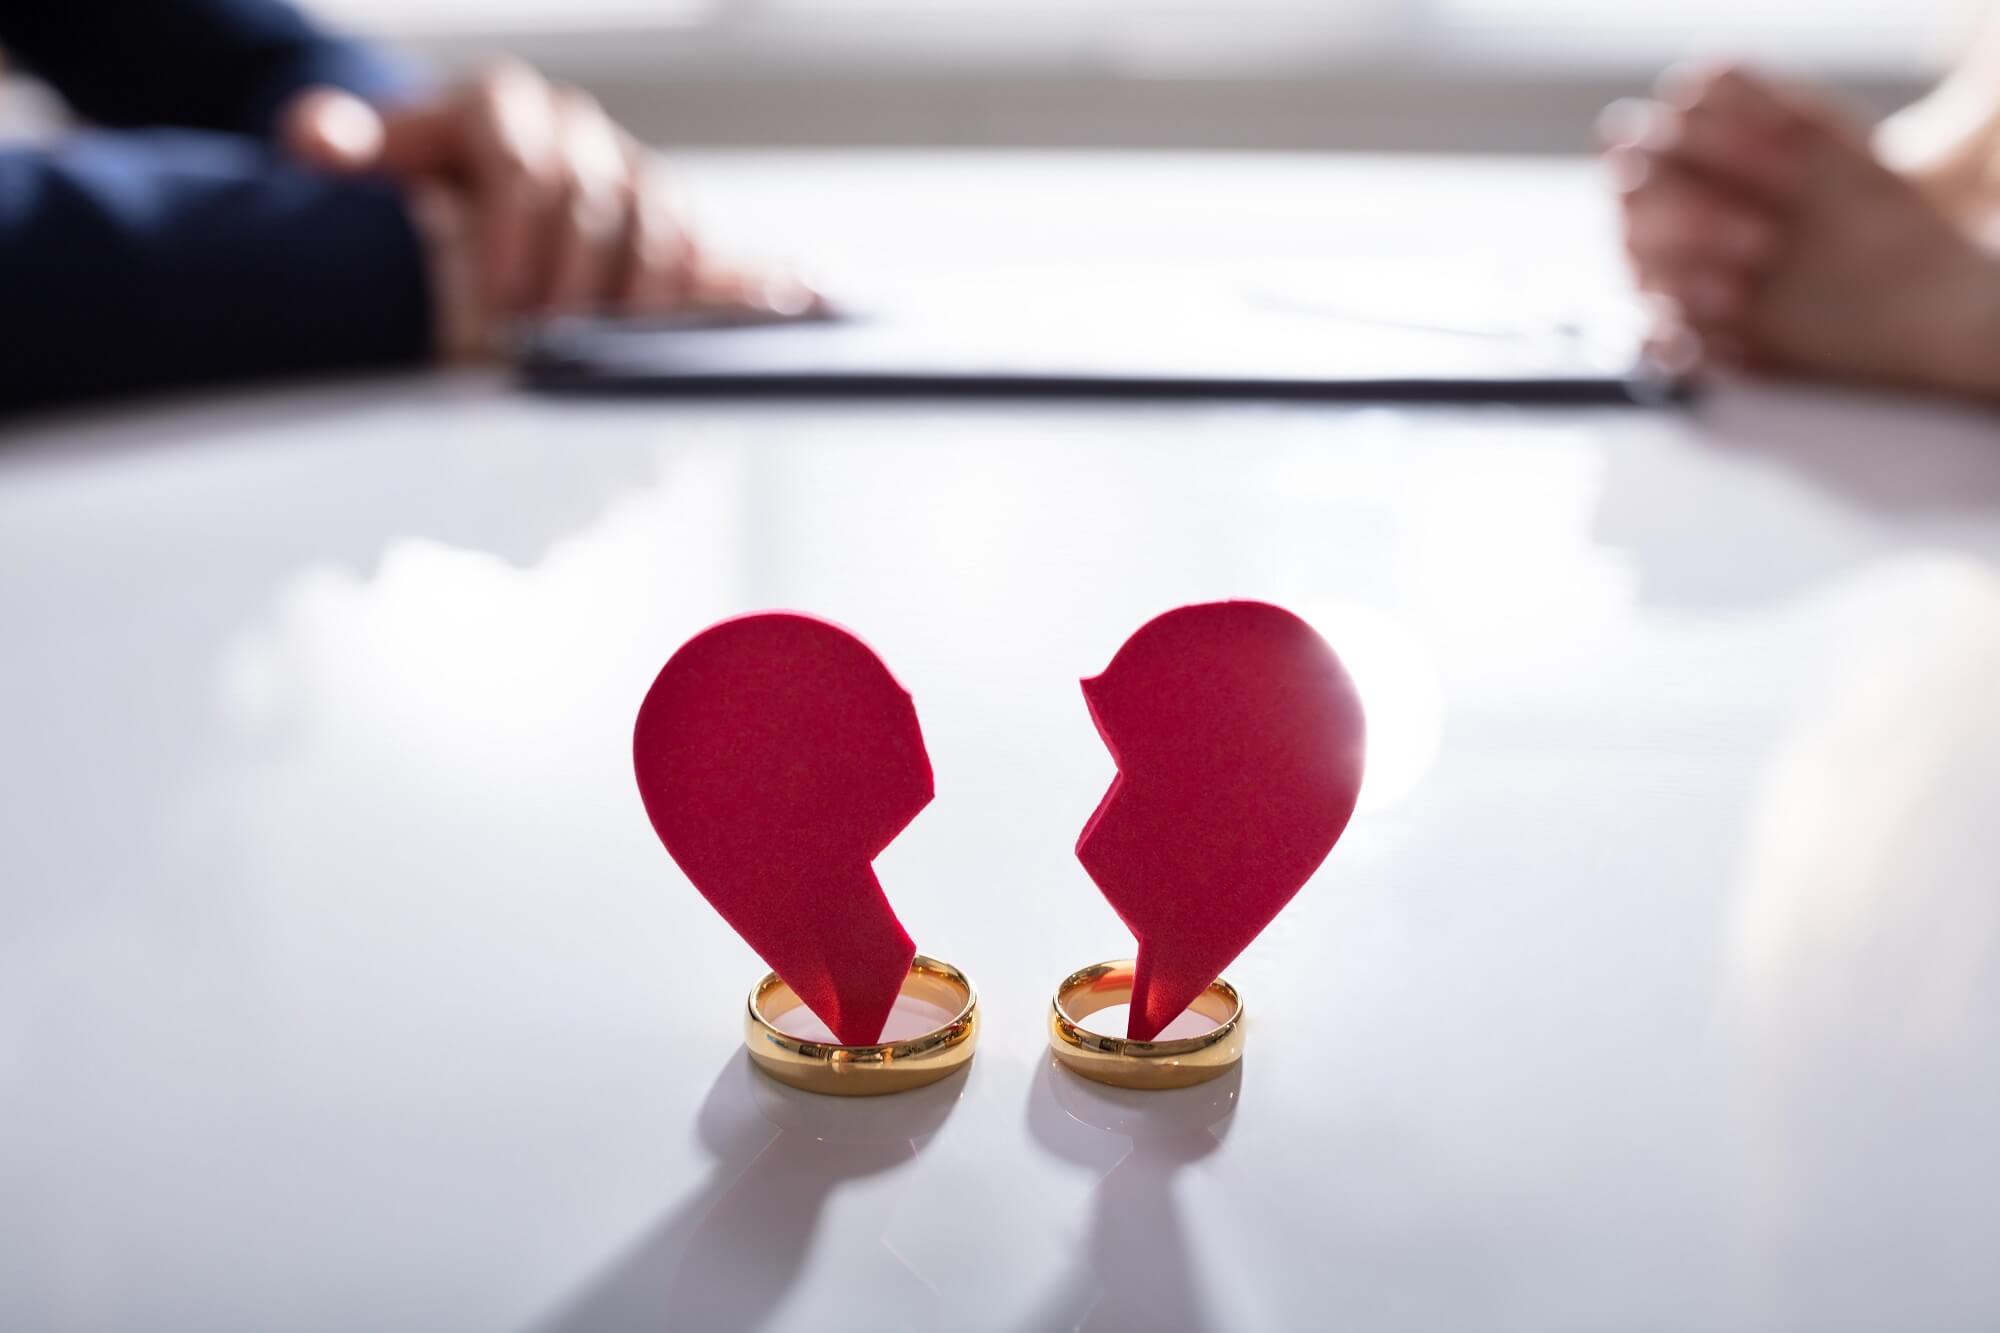 The couple is trying to file for a no-fault divorce.